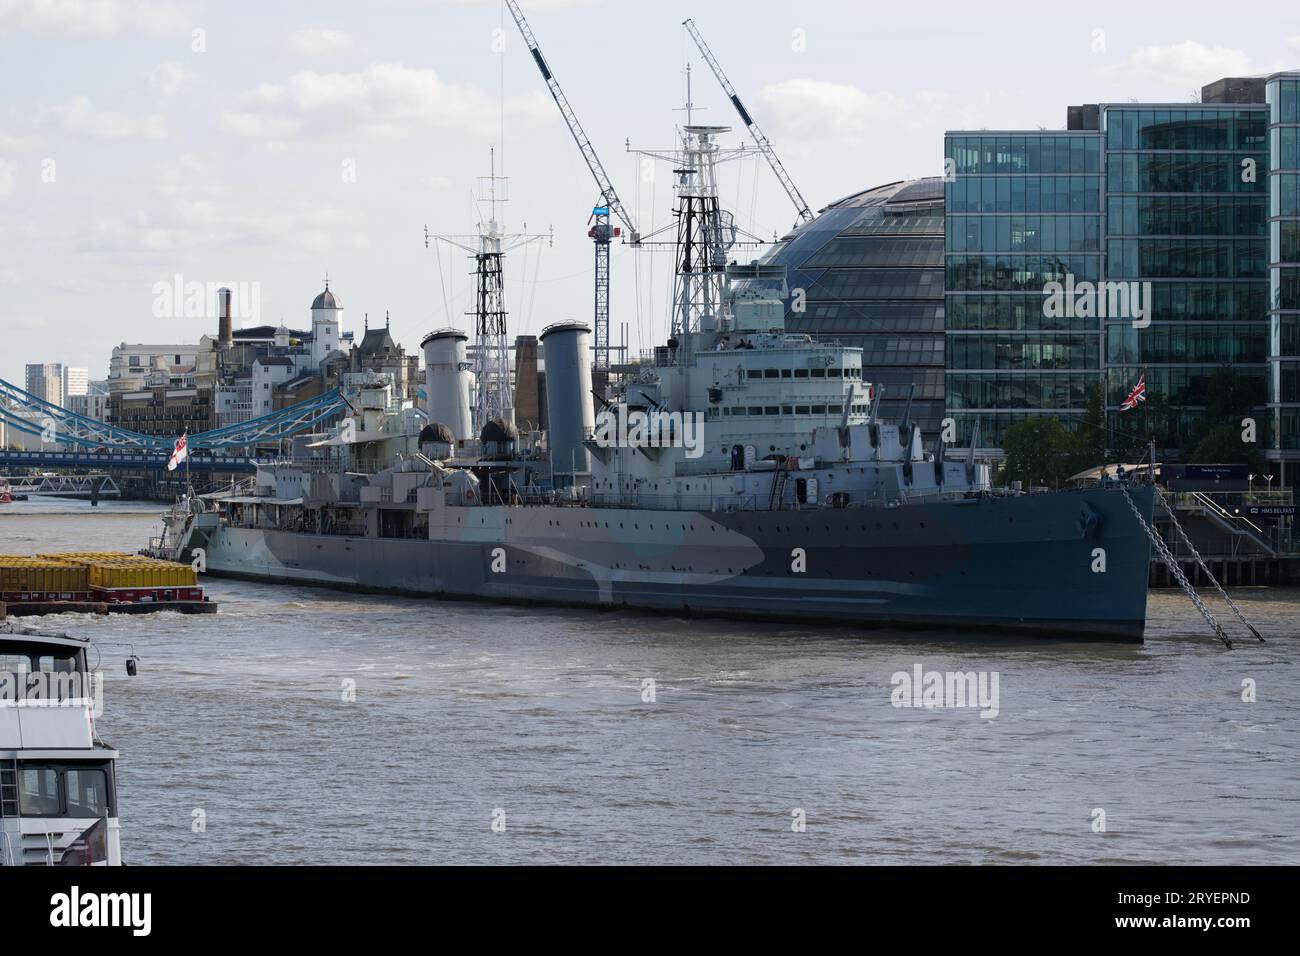 HMS Belfast moored on the River Thames Stock Photo